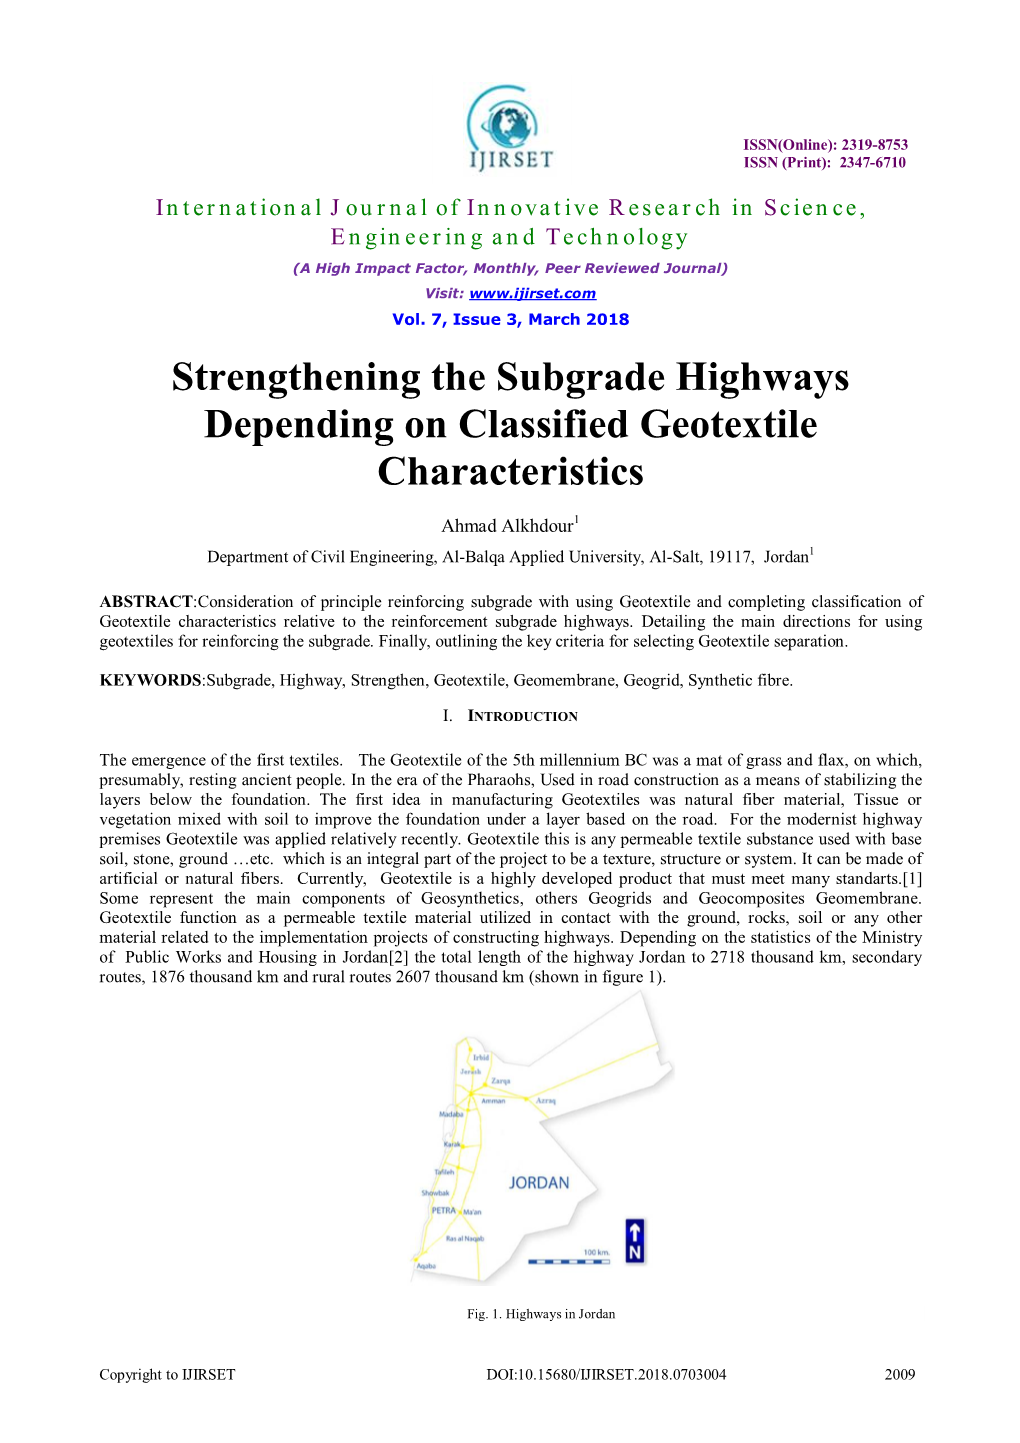 Strengthening the Subgrade Highways Depending on Classified Geotextile Characteristics